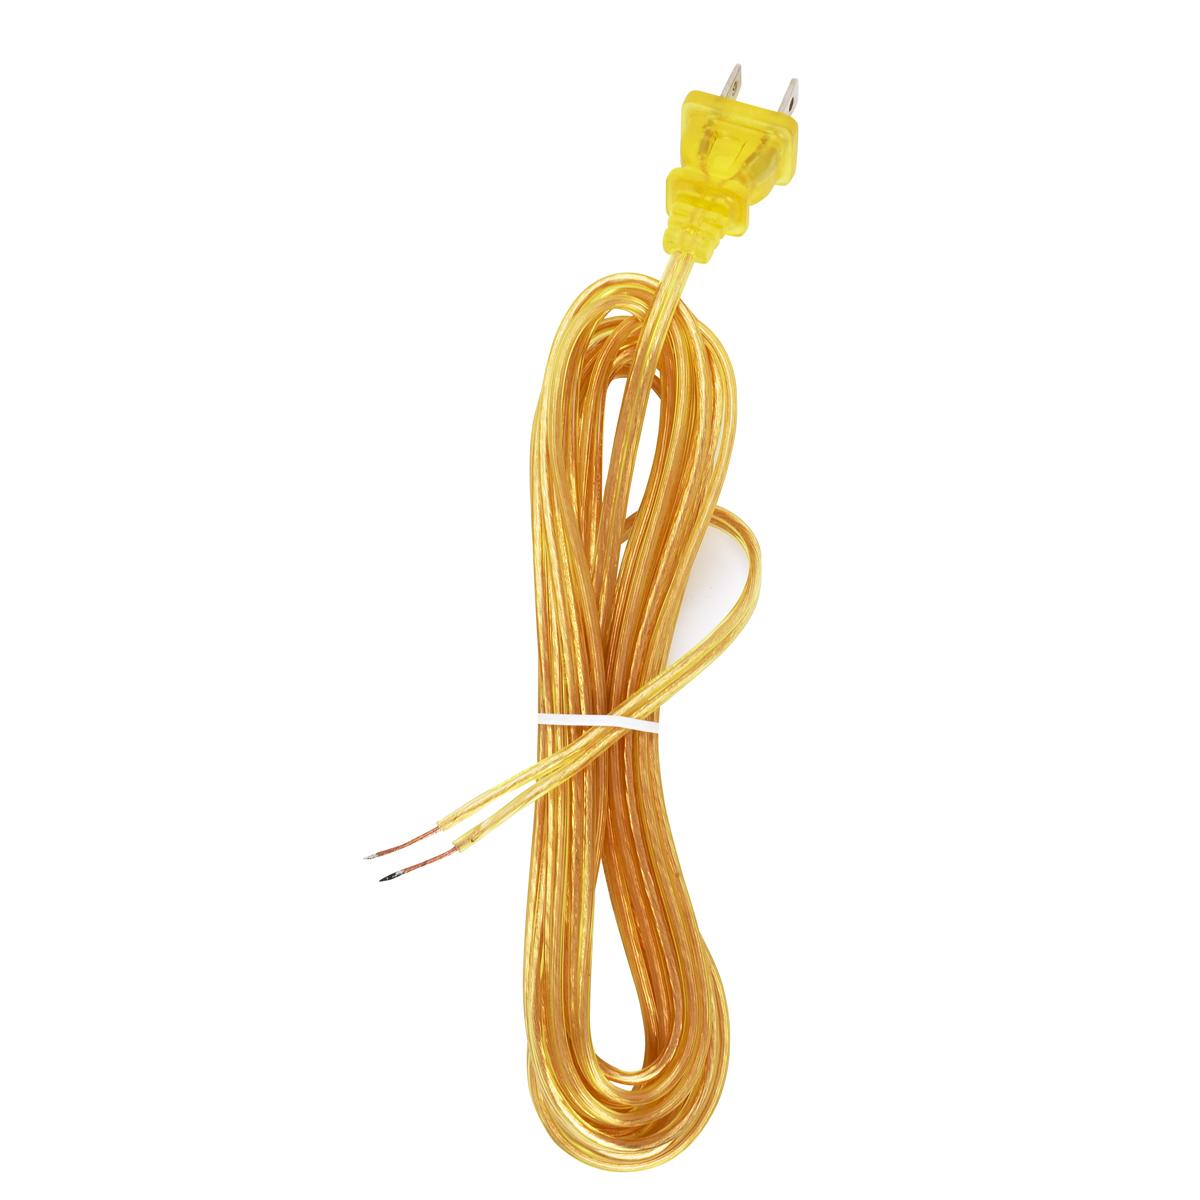 Satco 90-1531 18/2 SPT-1-105C All Cord Sets - Molded Plug - Tinned Tips 3/4" Strip with 2" Slit 100 Ctn. 15 Ft.